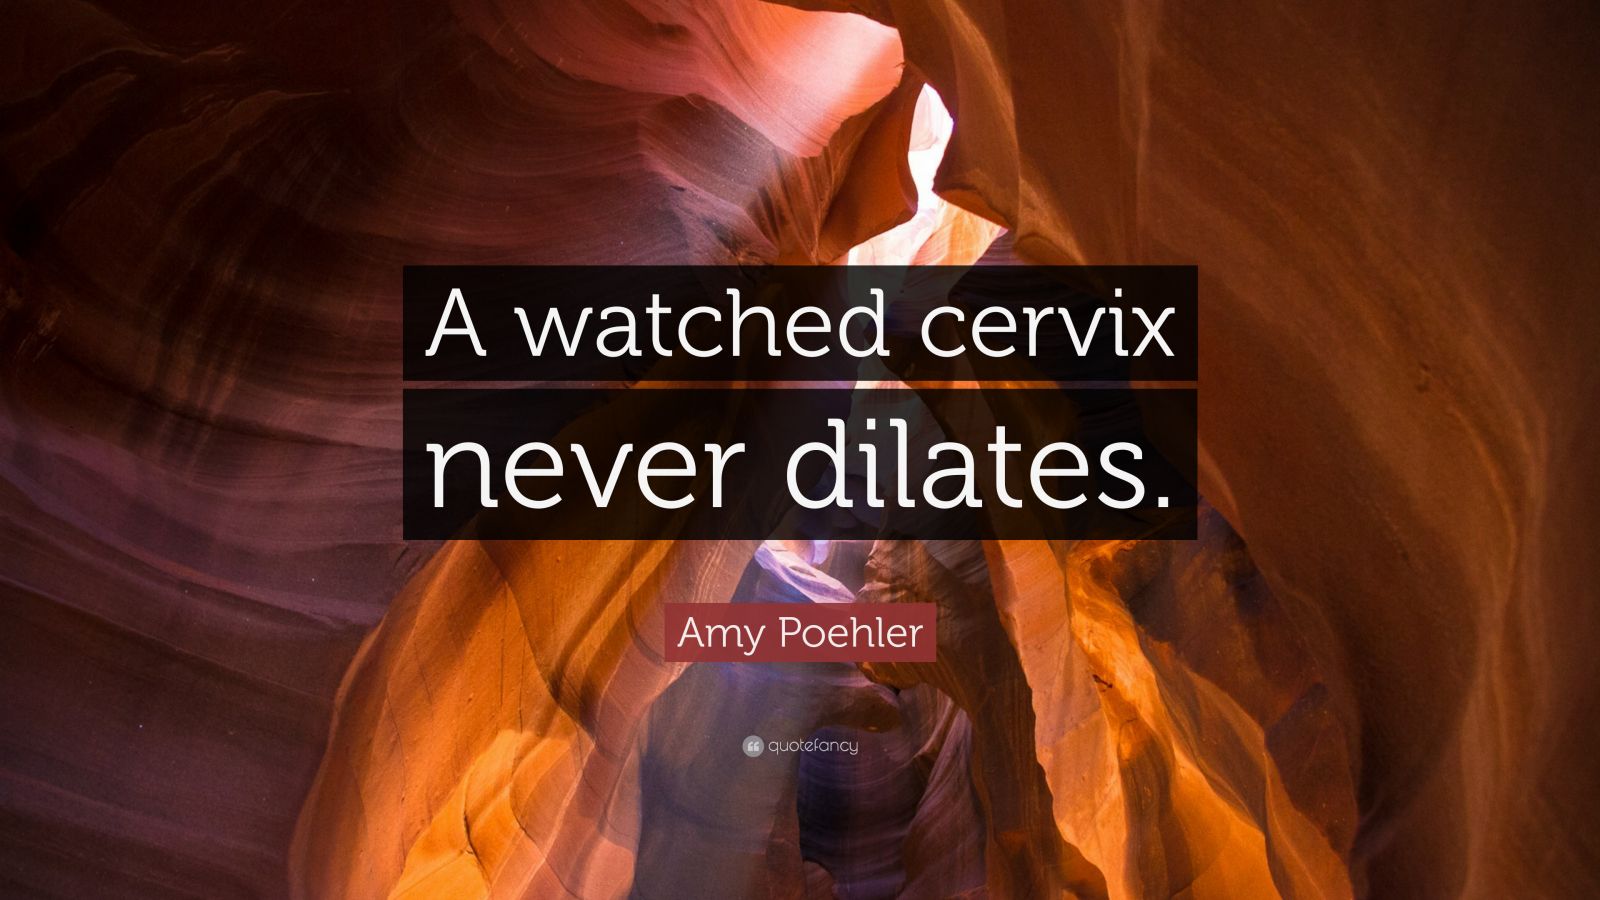 Amy Poehler Quote “a Watched Cervix Never Dilates” 8105